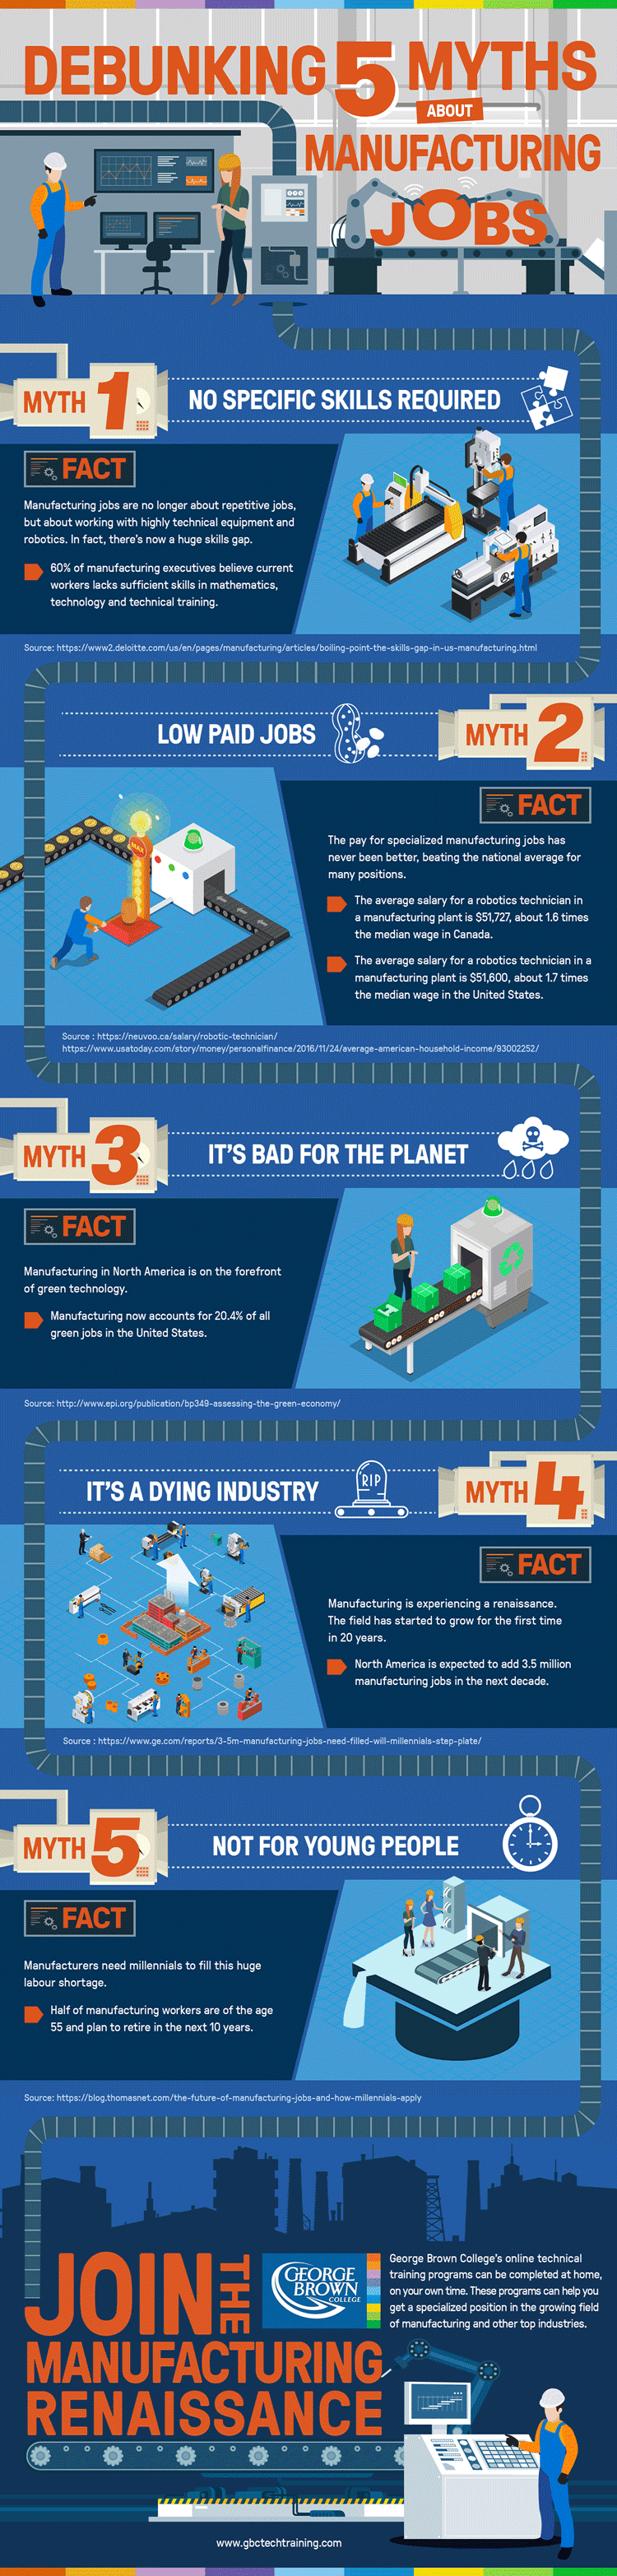 Debunking 5 Myths About Manufacturing Jobs #infographic